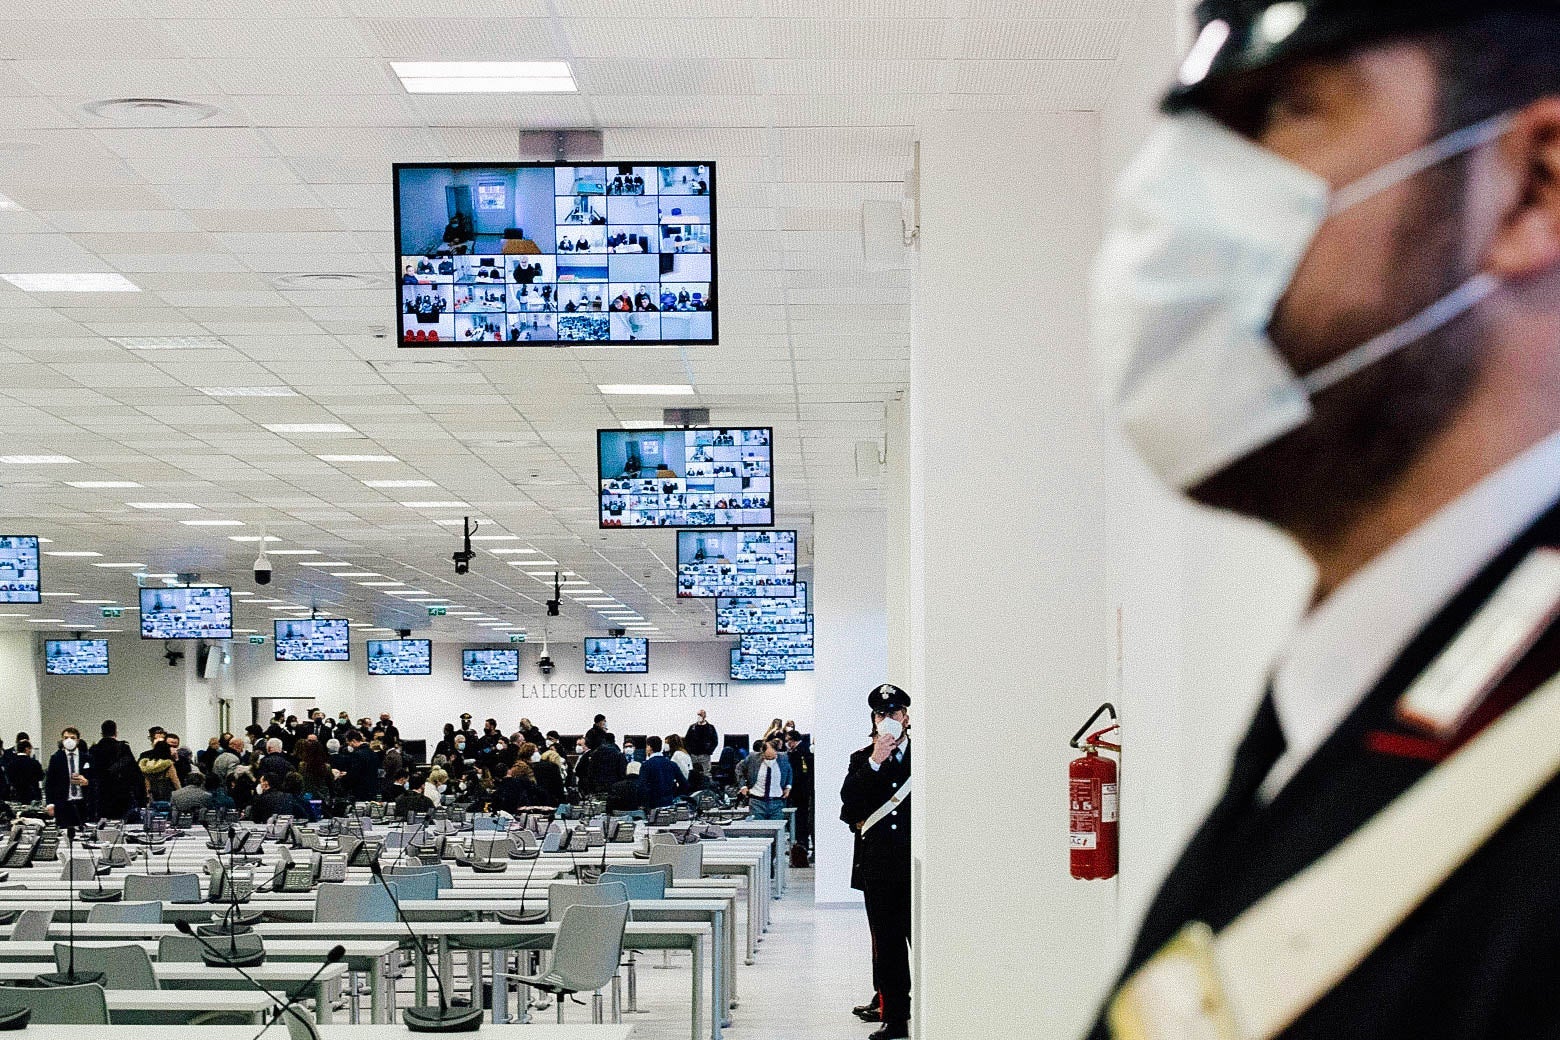 A general view shows a special courtroom on January 13, 2021 prior to the opening of the 'Rinascita-Scott' maxi-trial in which more than 350 alleged members of Calabria's 'Ndrangheta mafia group and their associates go on trial in Lamezia Terme, Calabria.